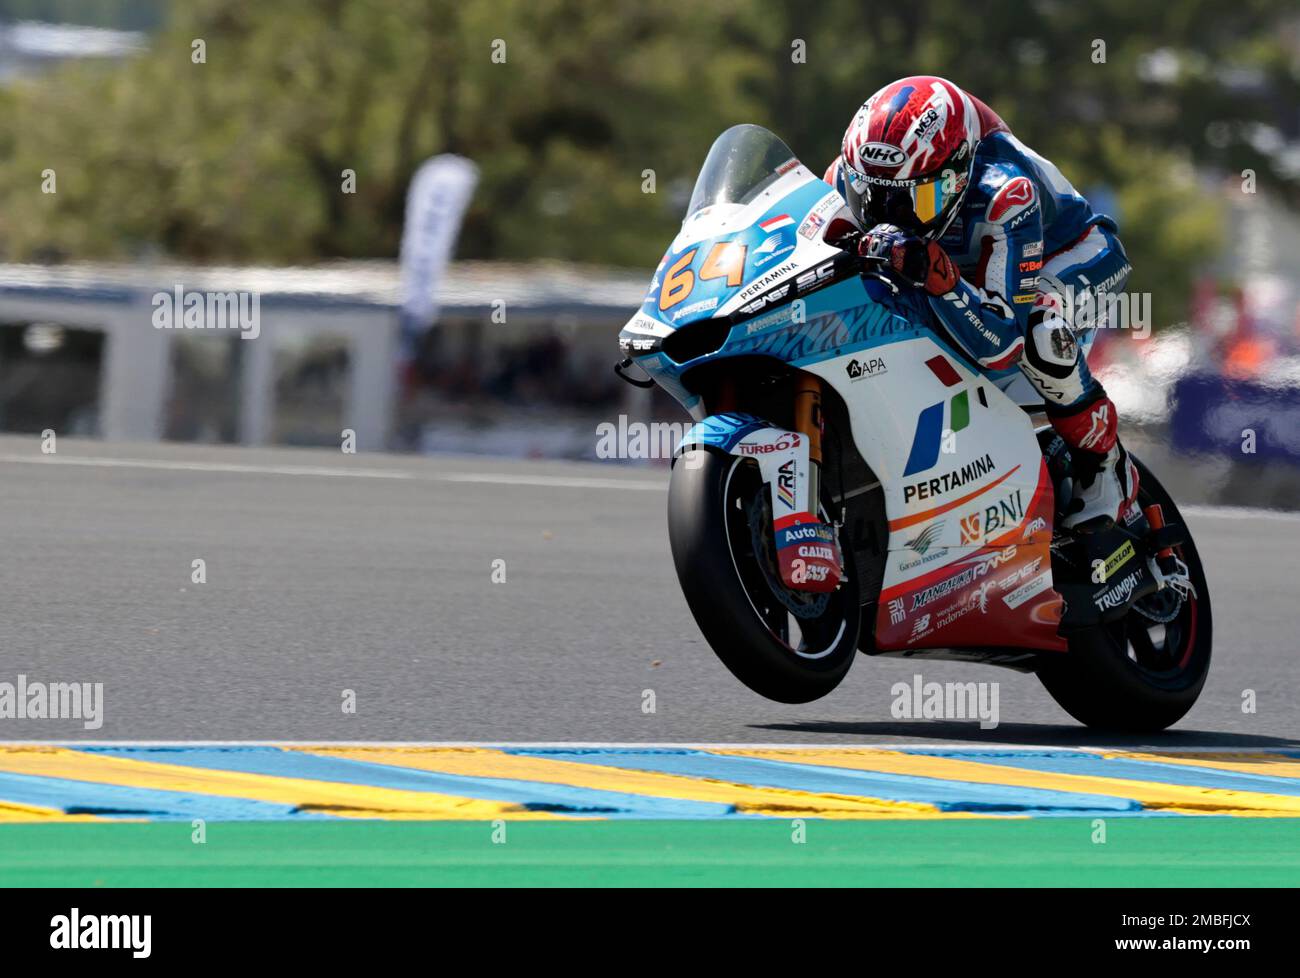 Netherlands rider Bo Bendsneyder of the Pertamina Mandalika SAG Team steers his motorcycle during the Moto2 race of the French Motorcycle Grand Prix at the Le Mans racetrack, in Le Mans, France,